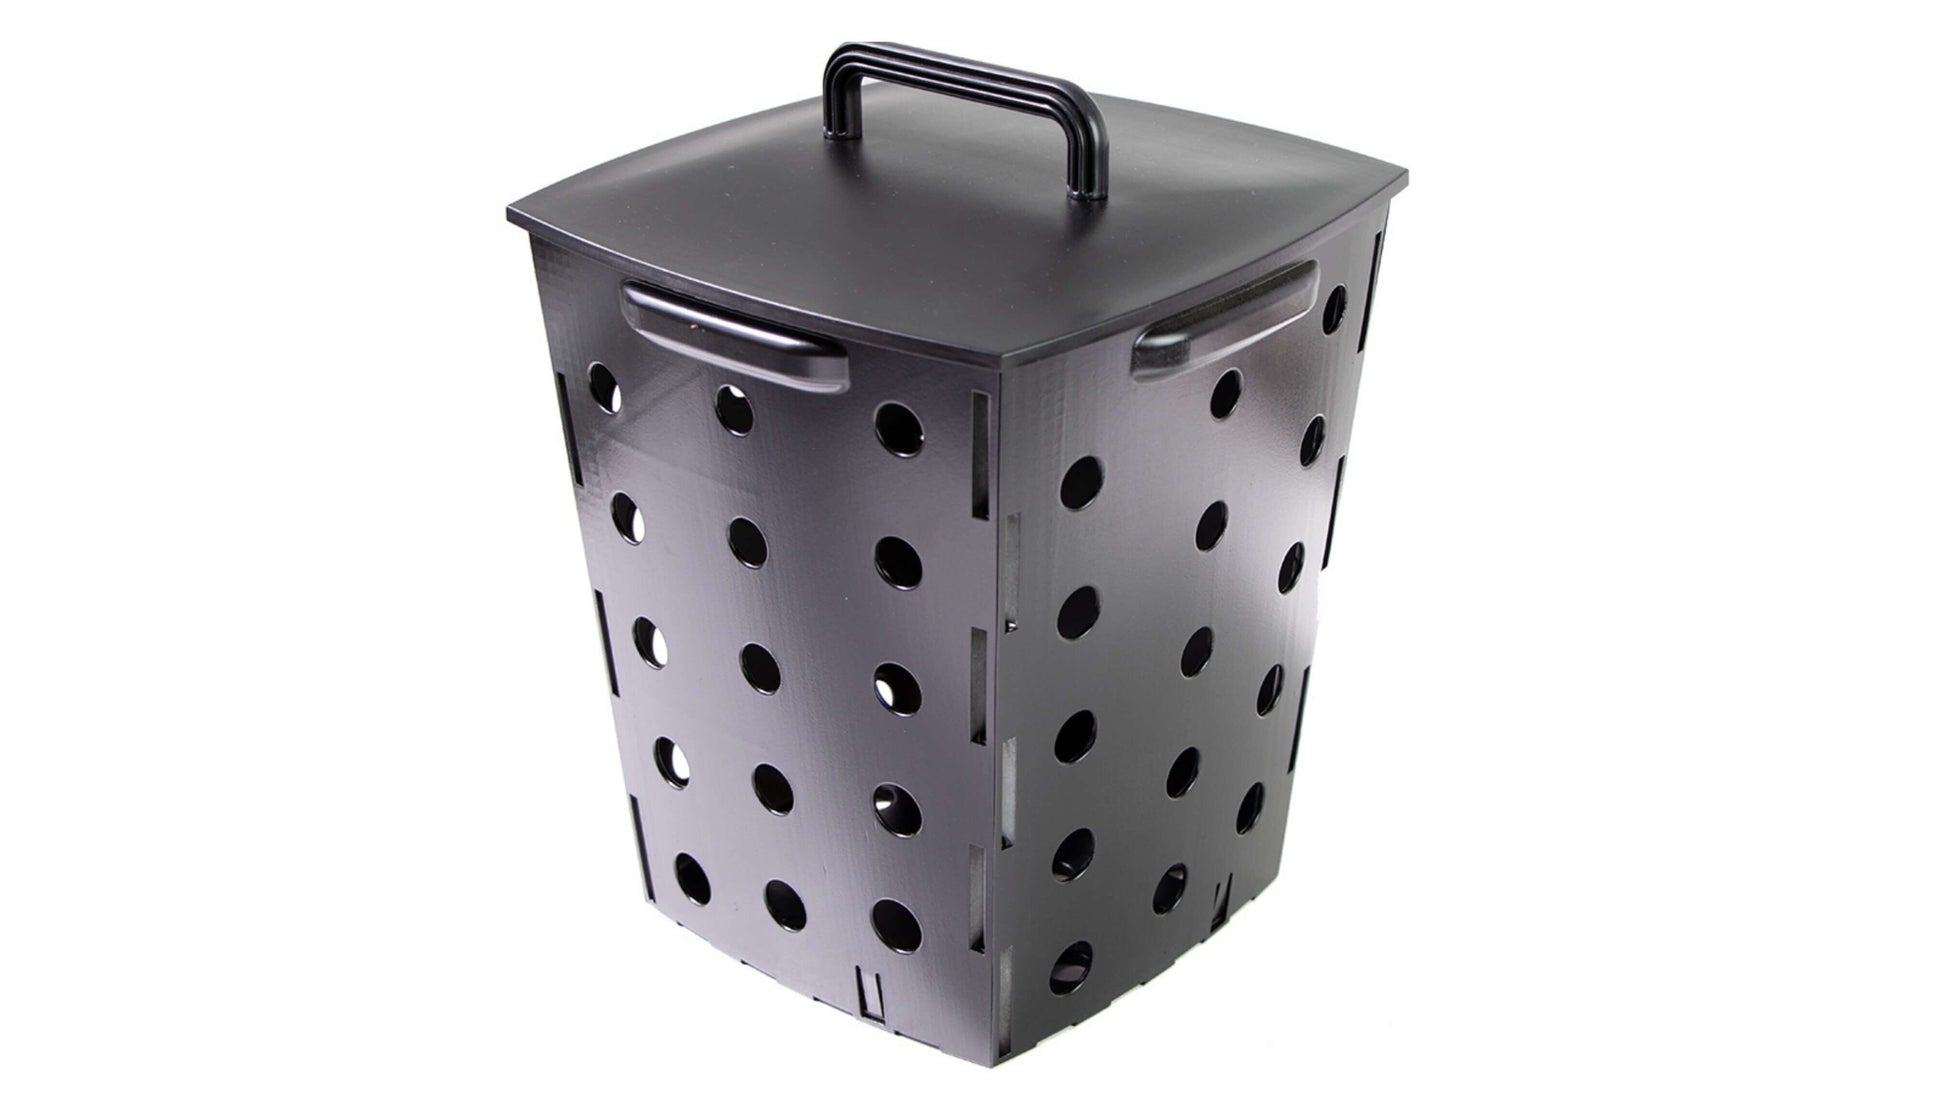 The 'Worm It All' Worm Composter Bin - Frame It All